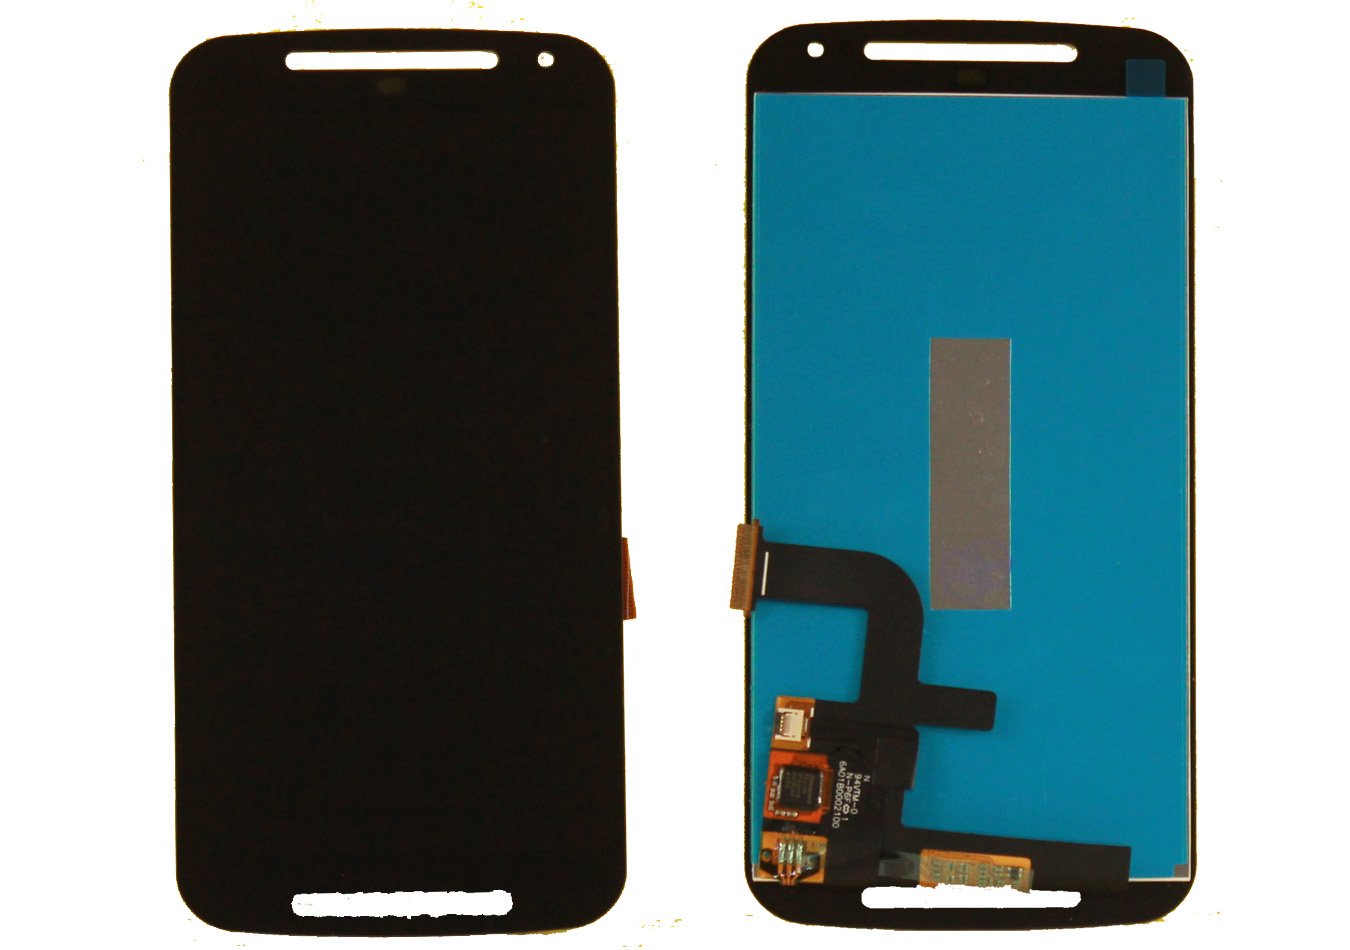 Moto G2 (XT1068) Screen Assembly (Without The Frame) (Refurbished) (Black)